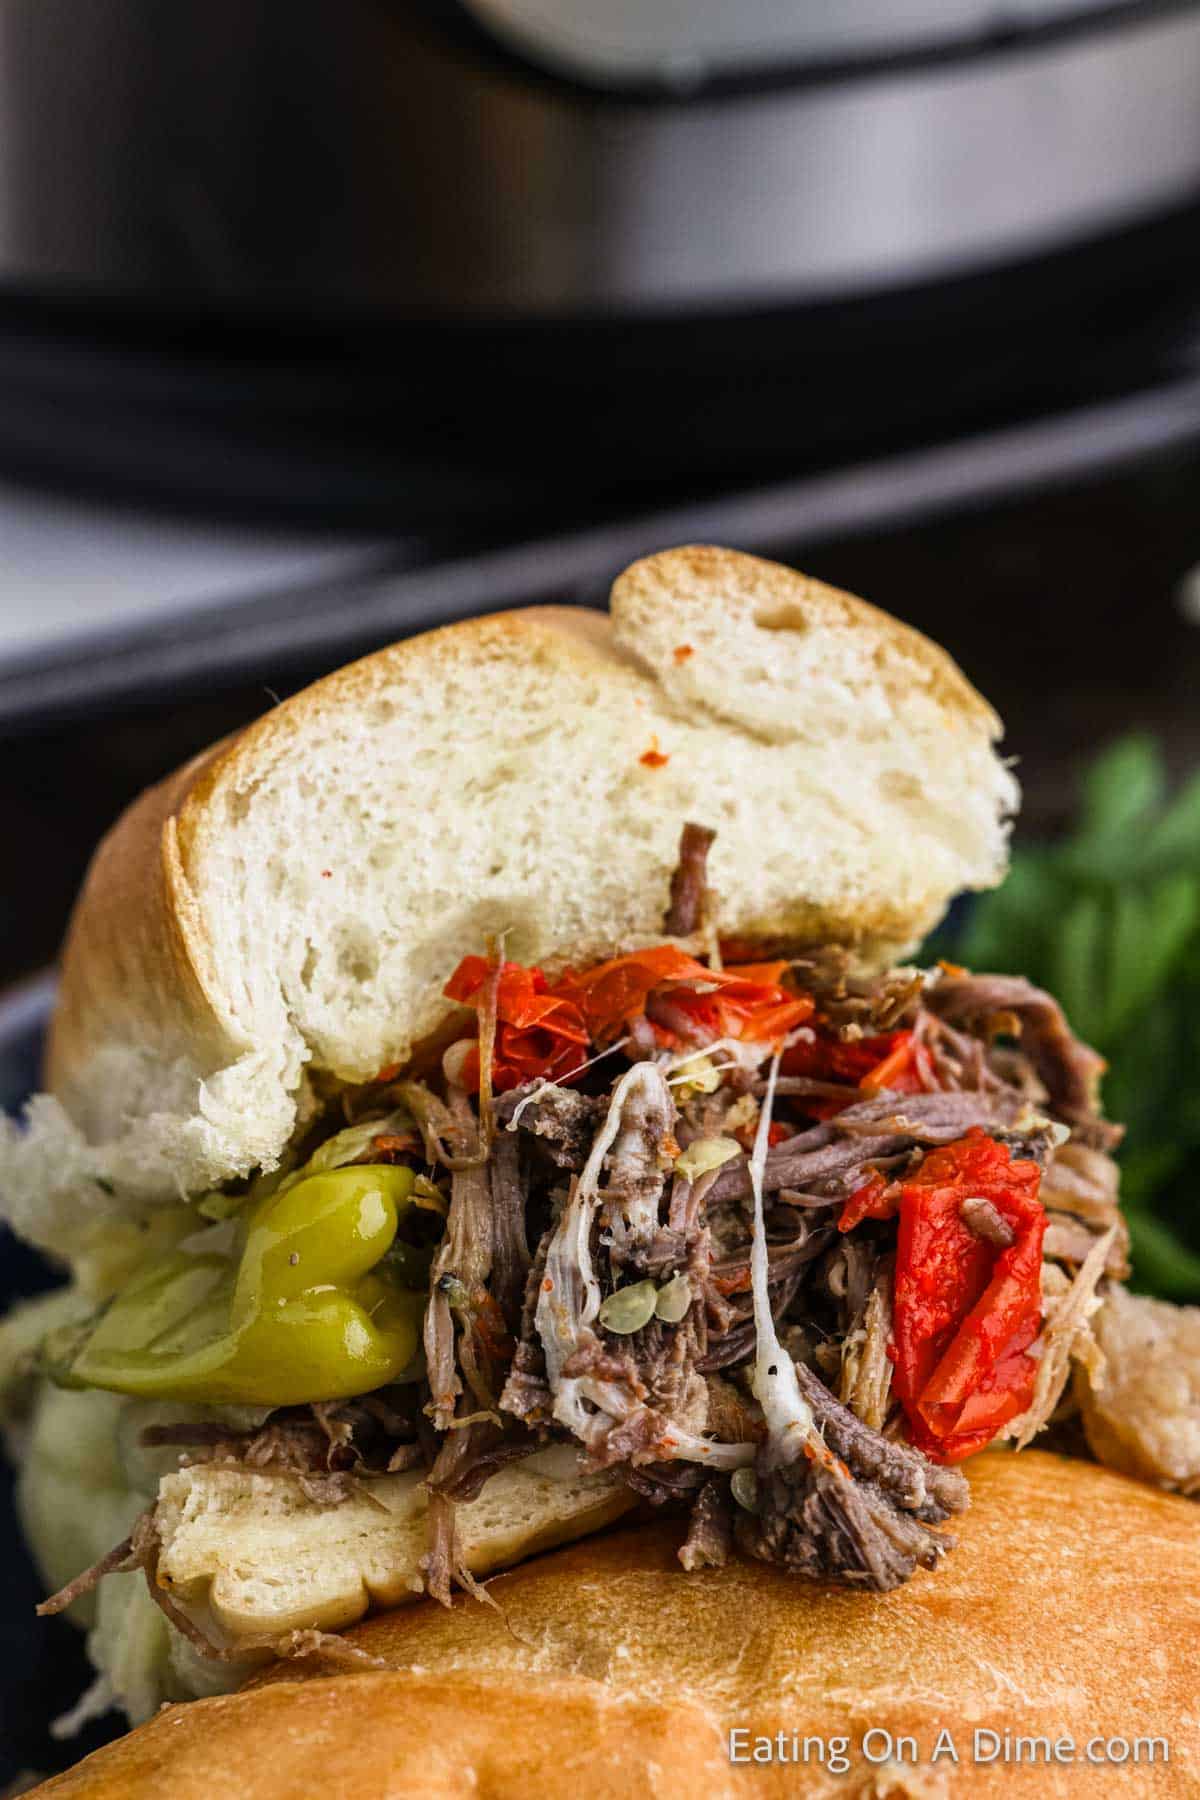 Italian Beef Sandwich cut in half with shredded beef topped with melted cheese and peppers